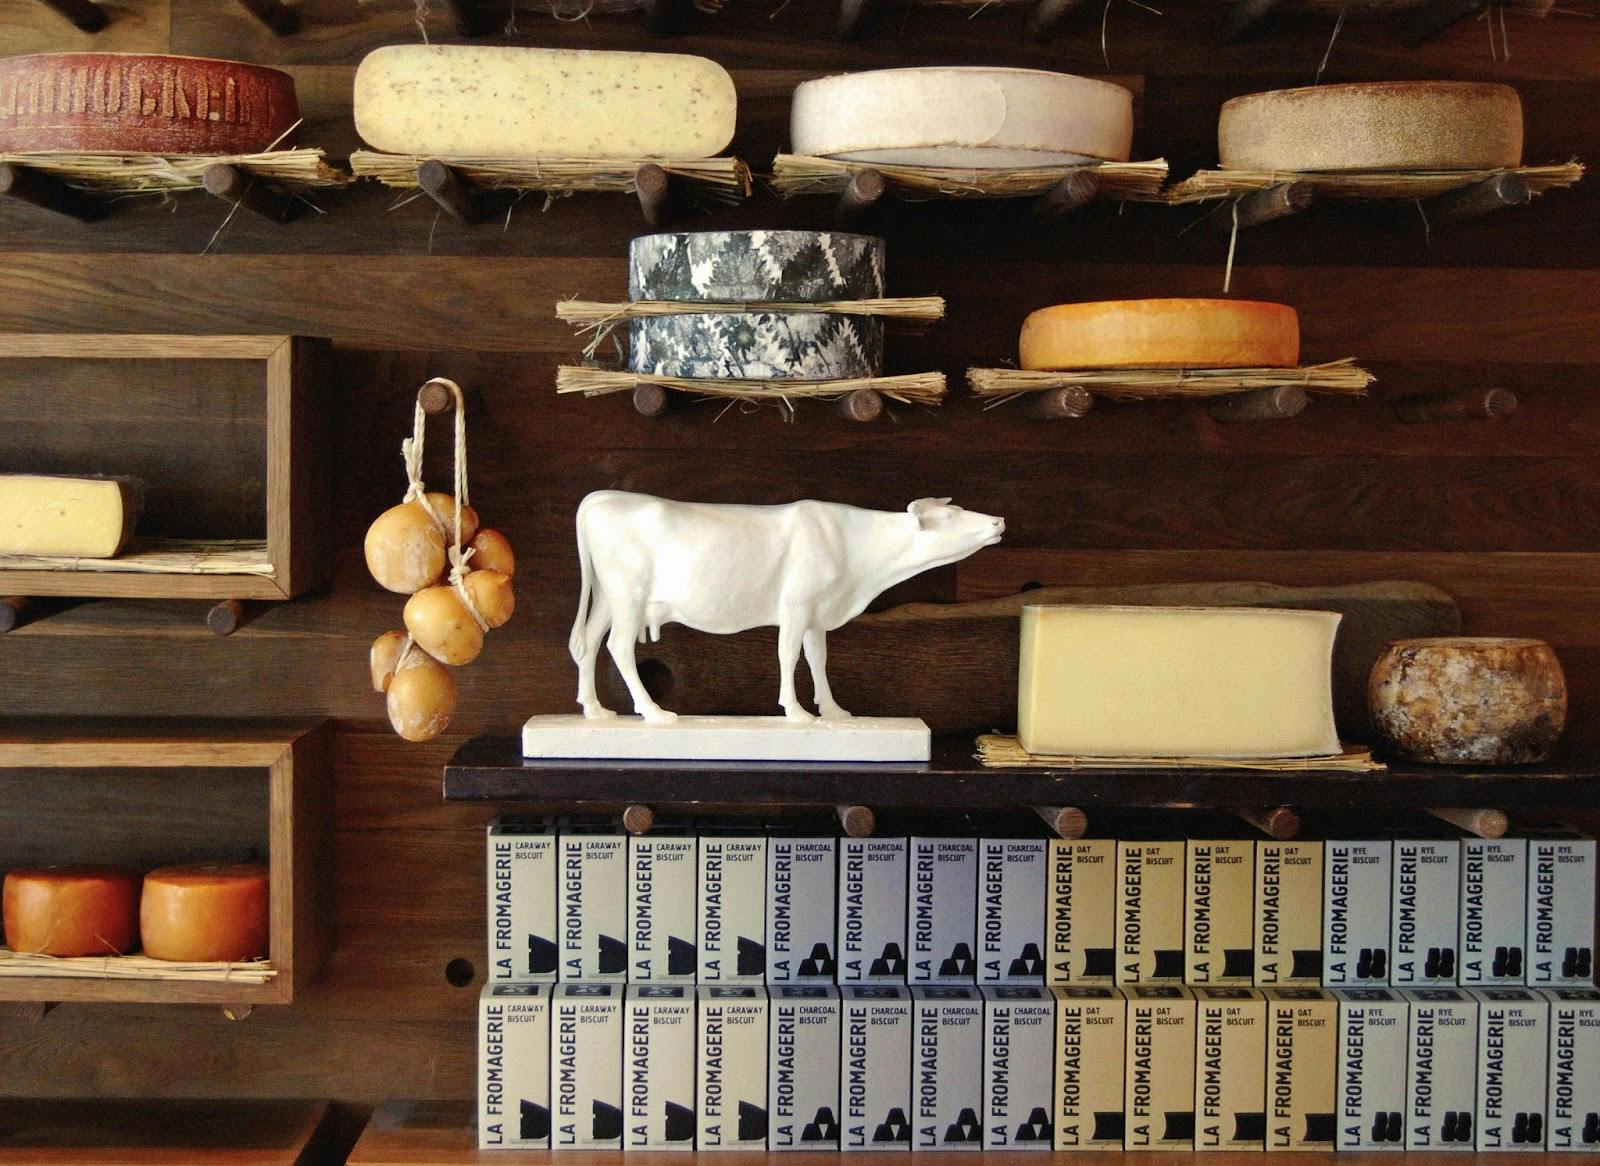 Image - La Fromagerie